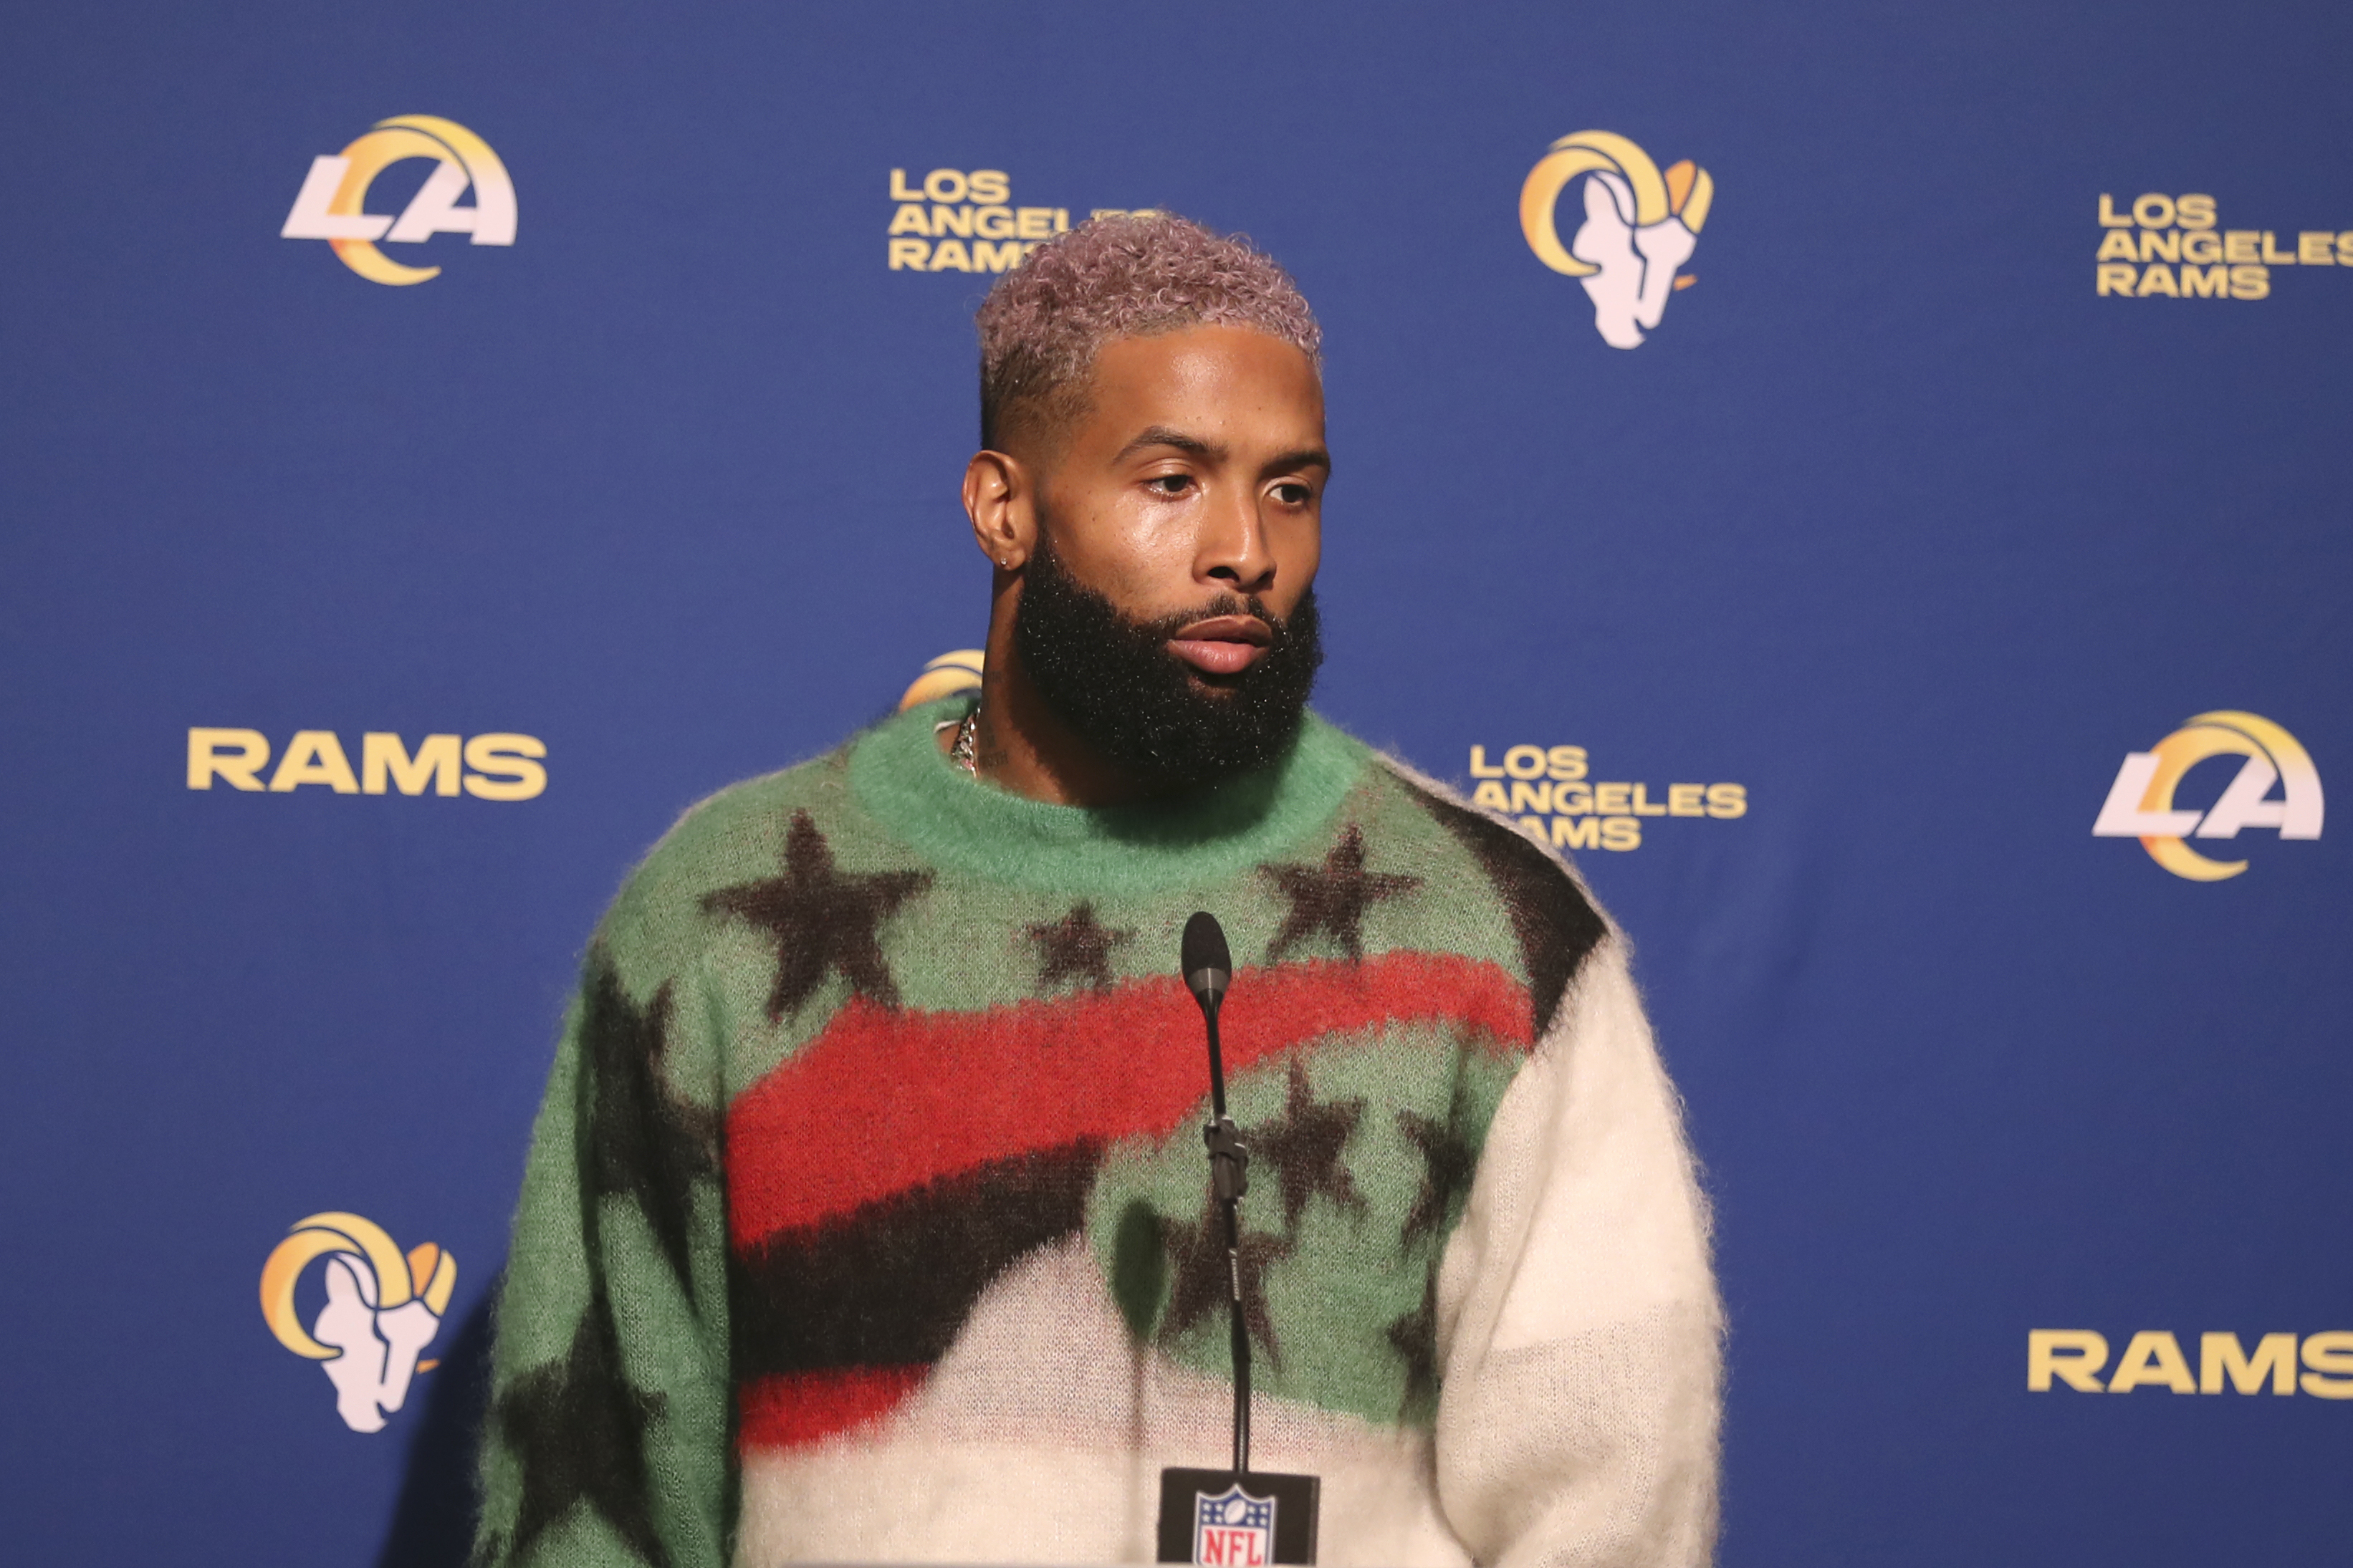 Odell Beckham Jr. takes subtle jab at the Packers with his custom